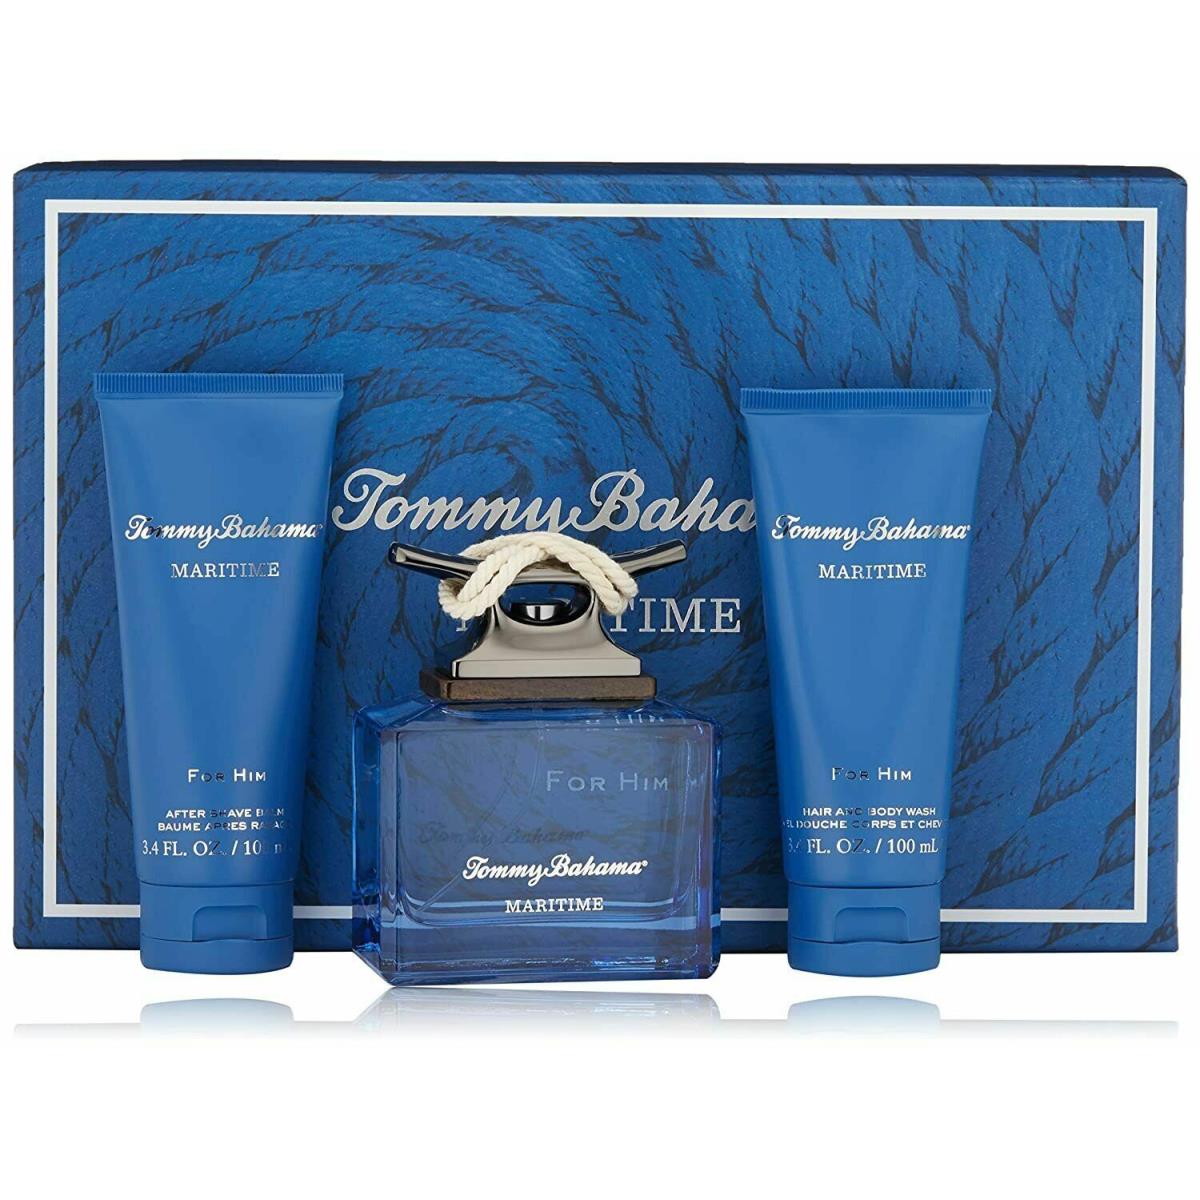 Maritime By Tommy Bahama Eau De Cologne 4.2 Spray 3.4 Aftershave Body Wash Set